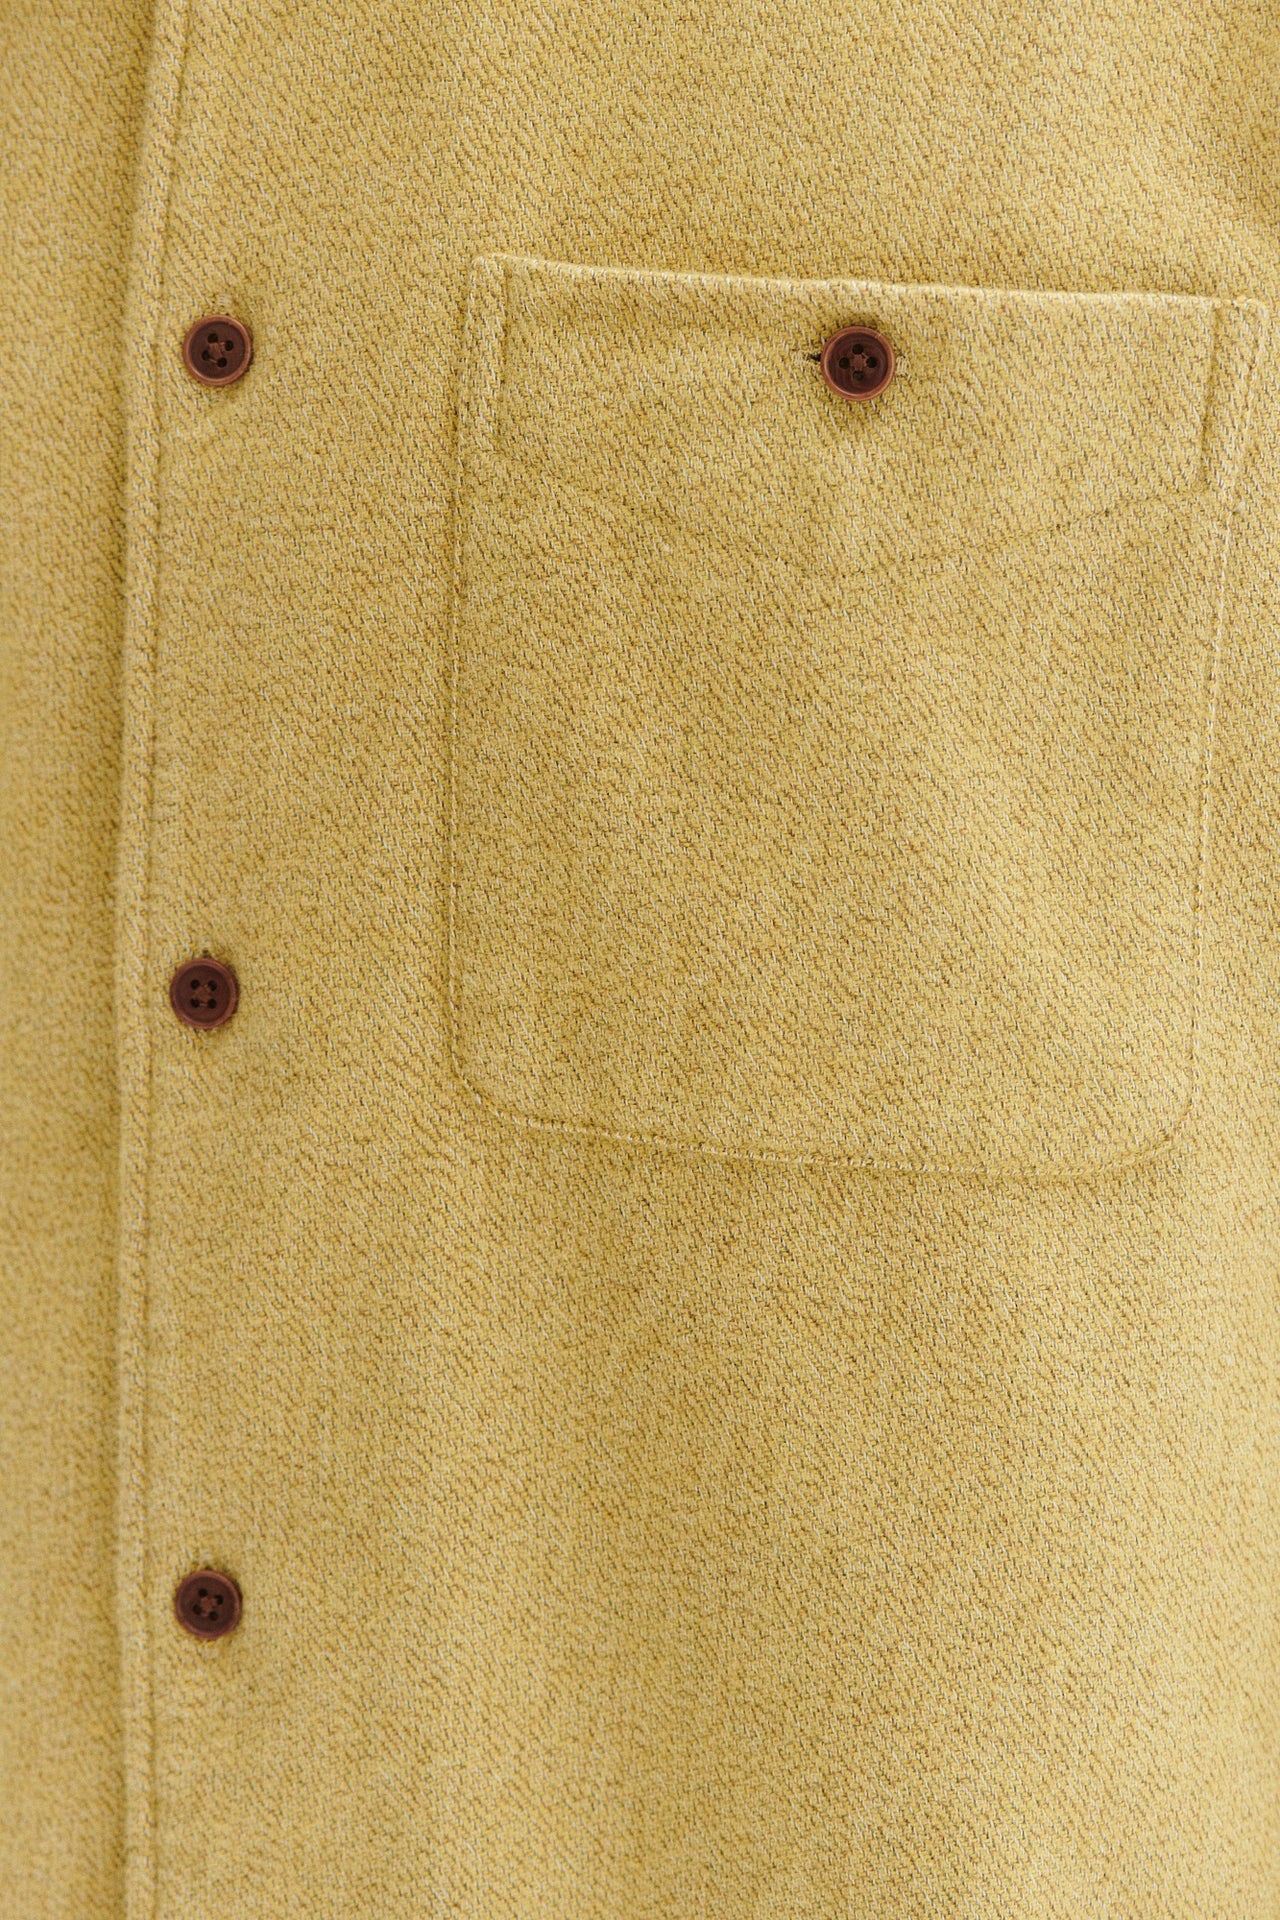 Strong Shirt in the Finest Yellow and Beige Portuguese Cotton Flannel